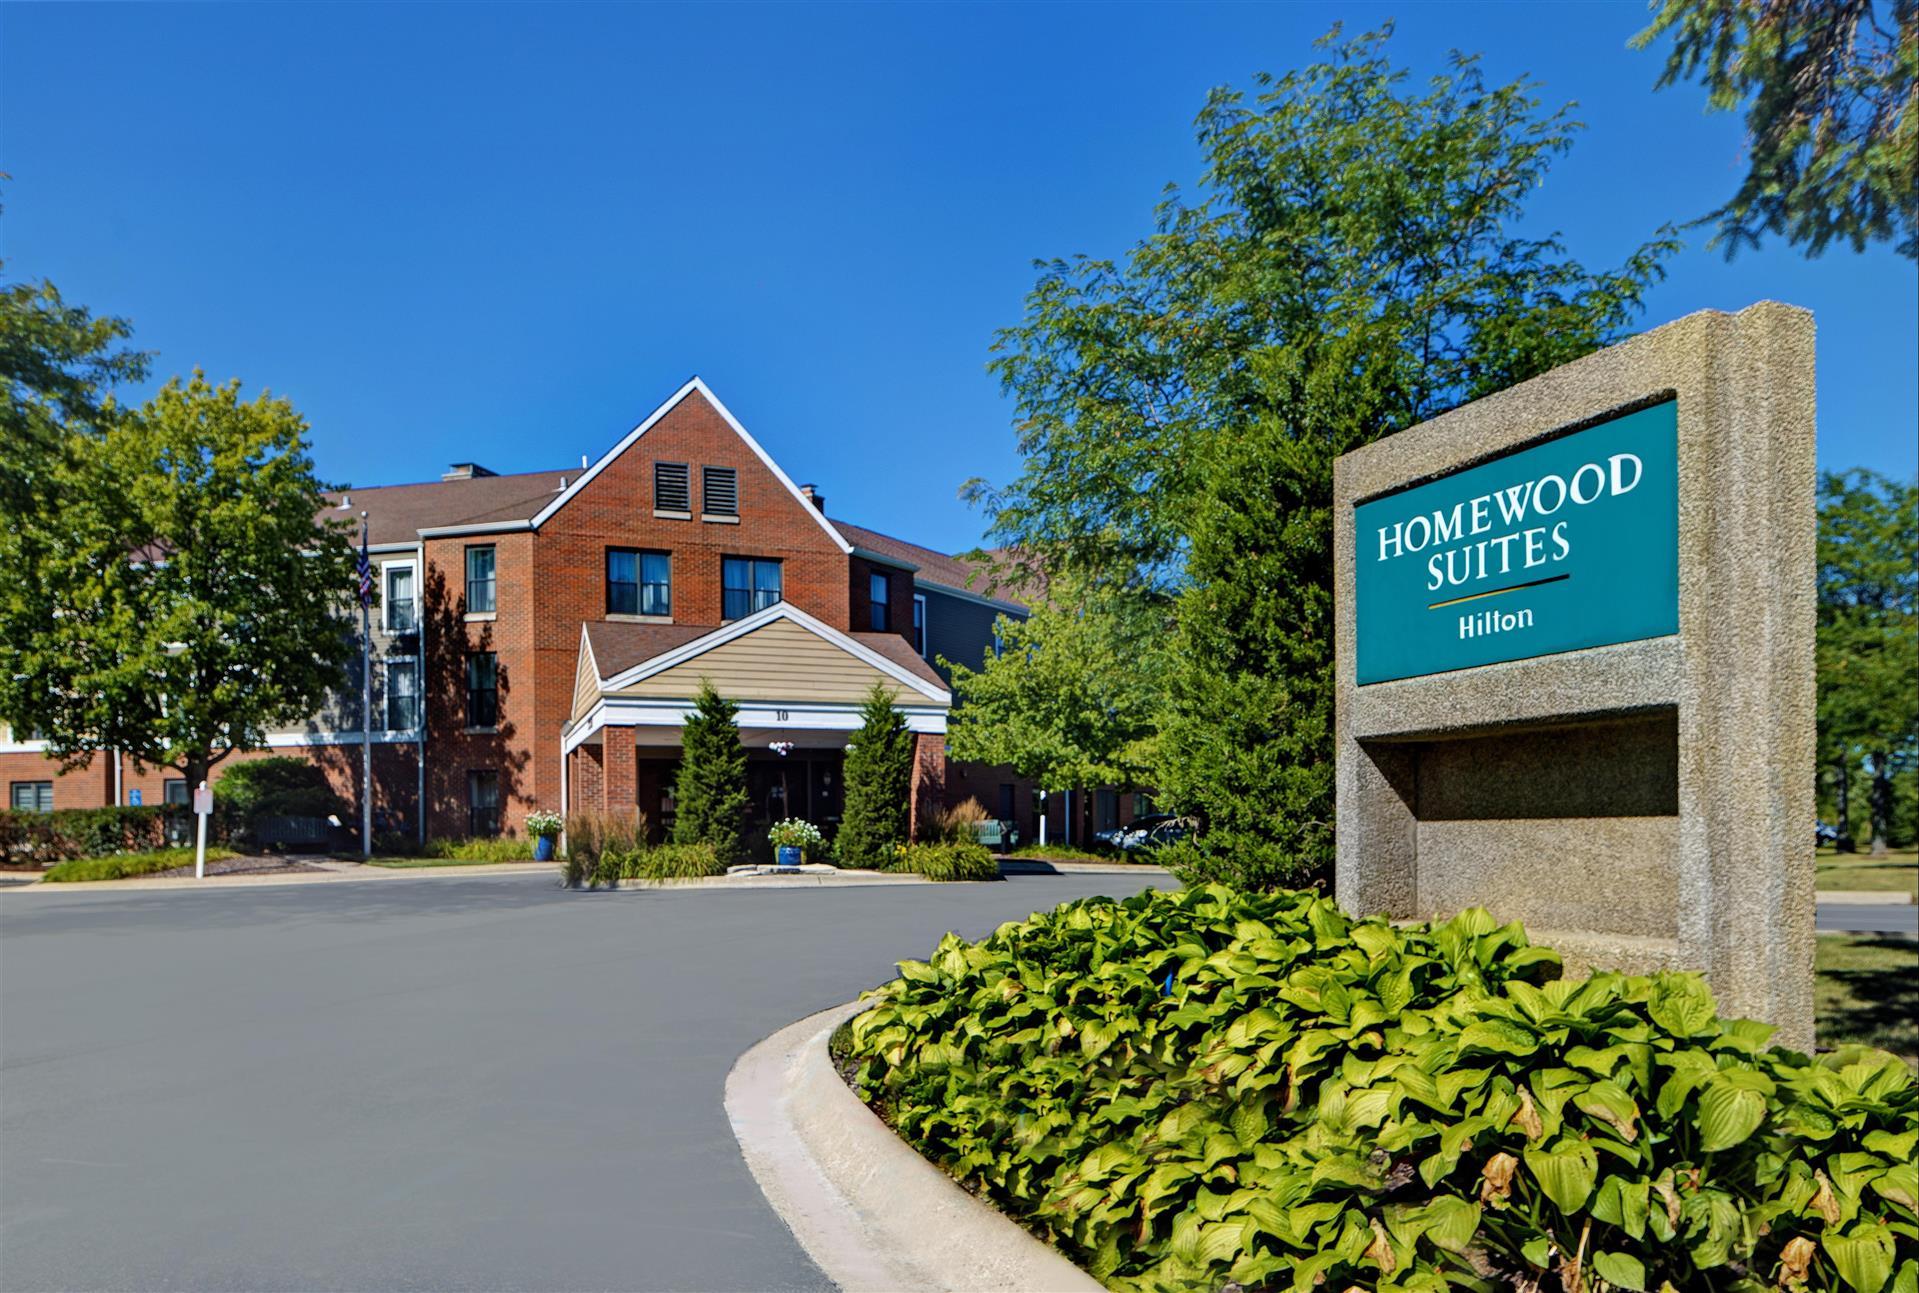 Homewood Suites by Hilton Chicago-Lincolnshire in Lincolnshire, IL